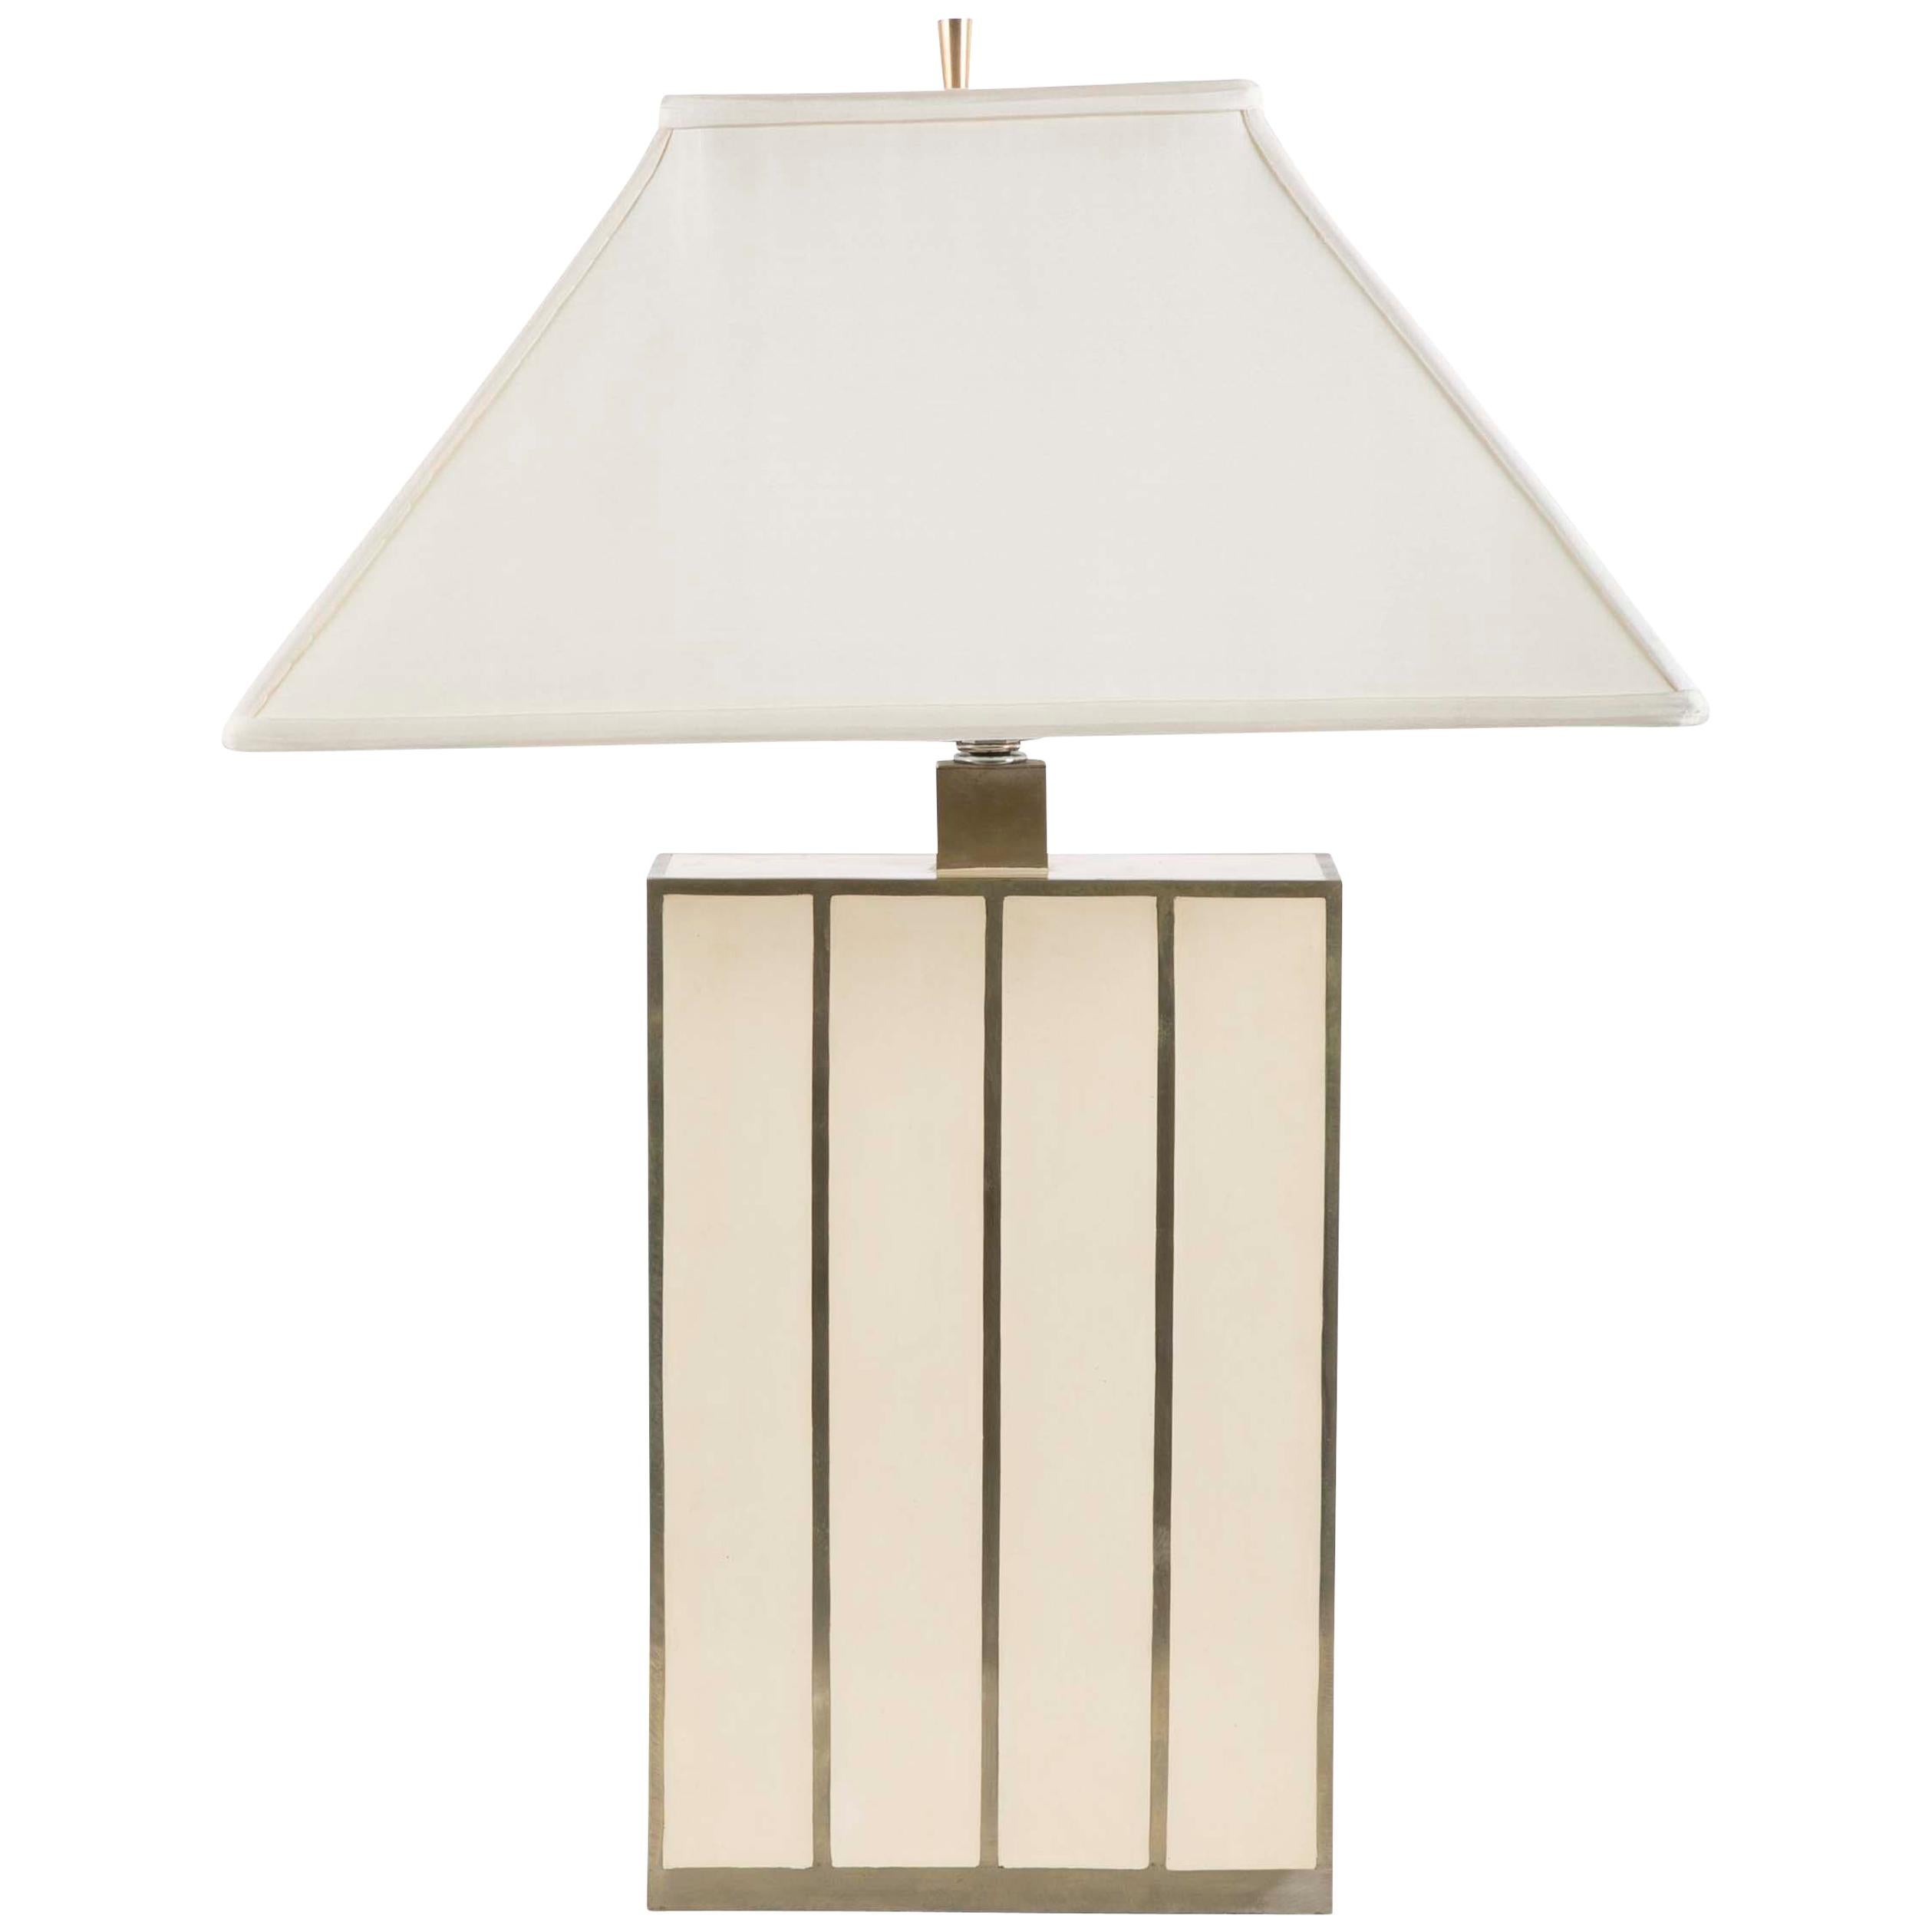 Robert Kuo Table Lamp with Ivory Colored Panels and Brass Banding